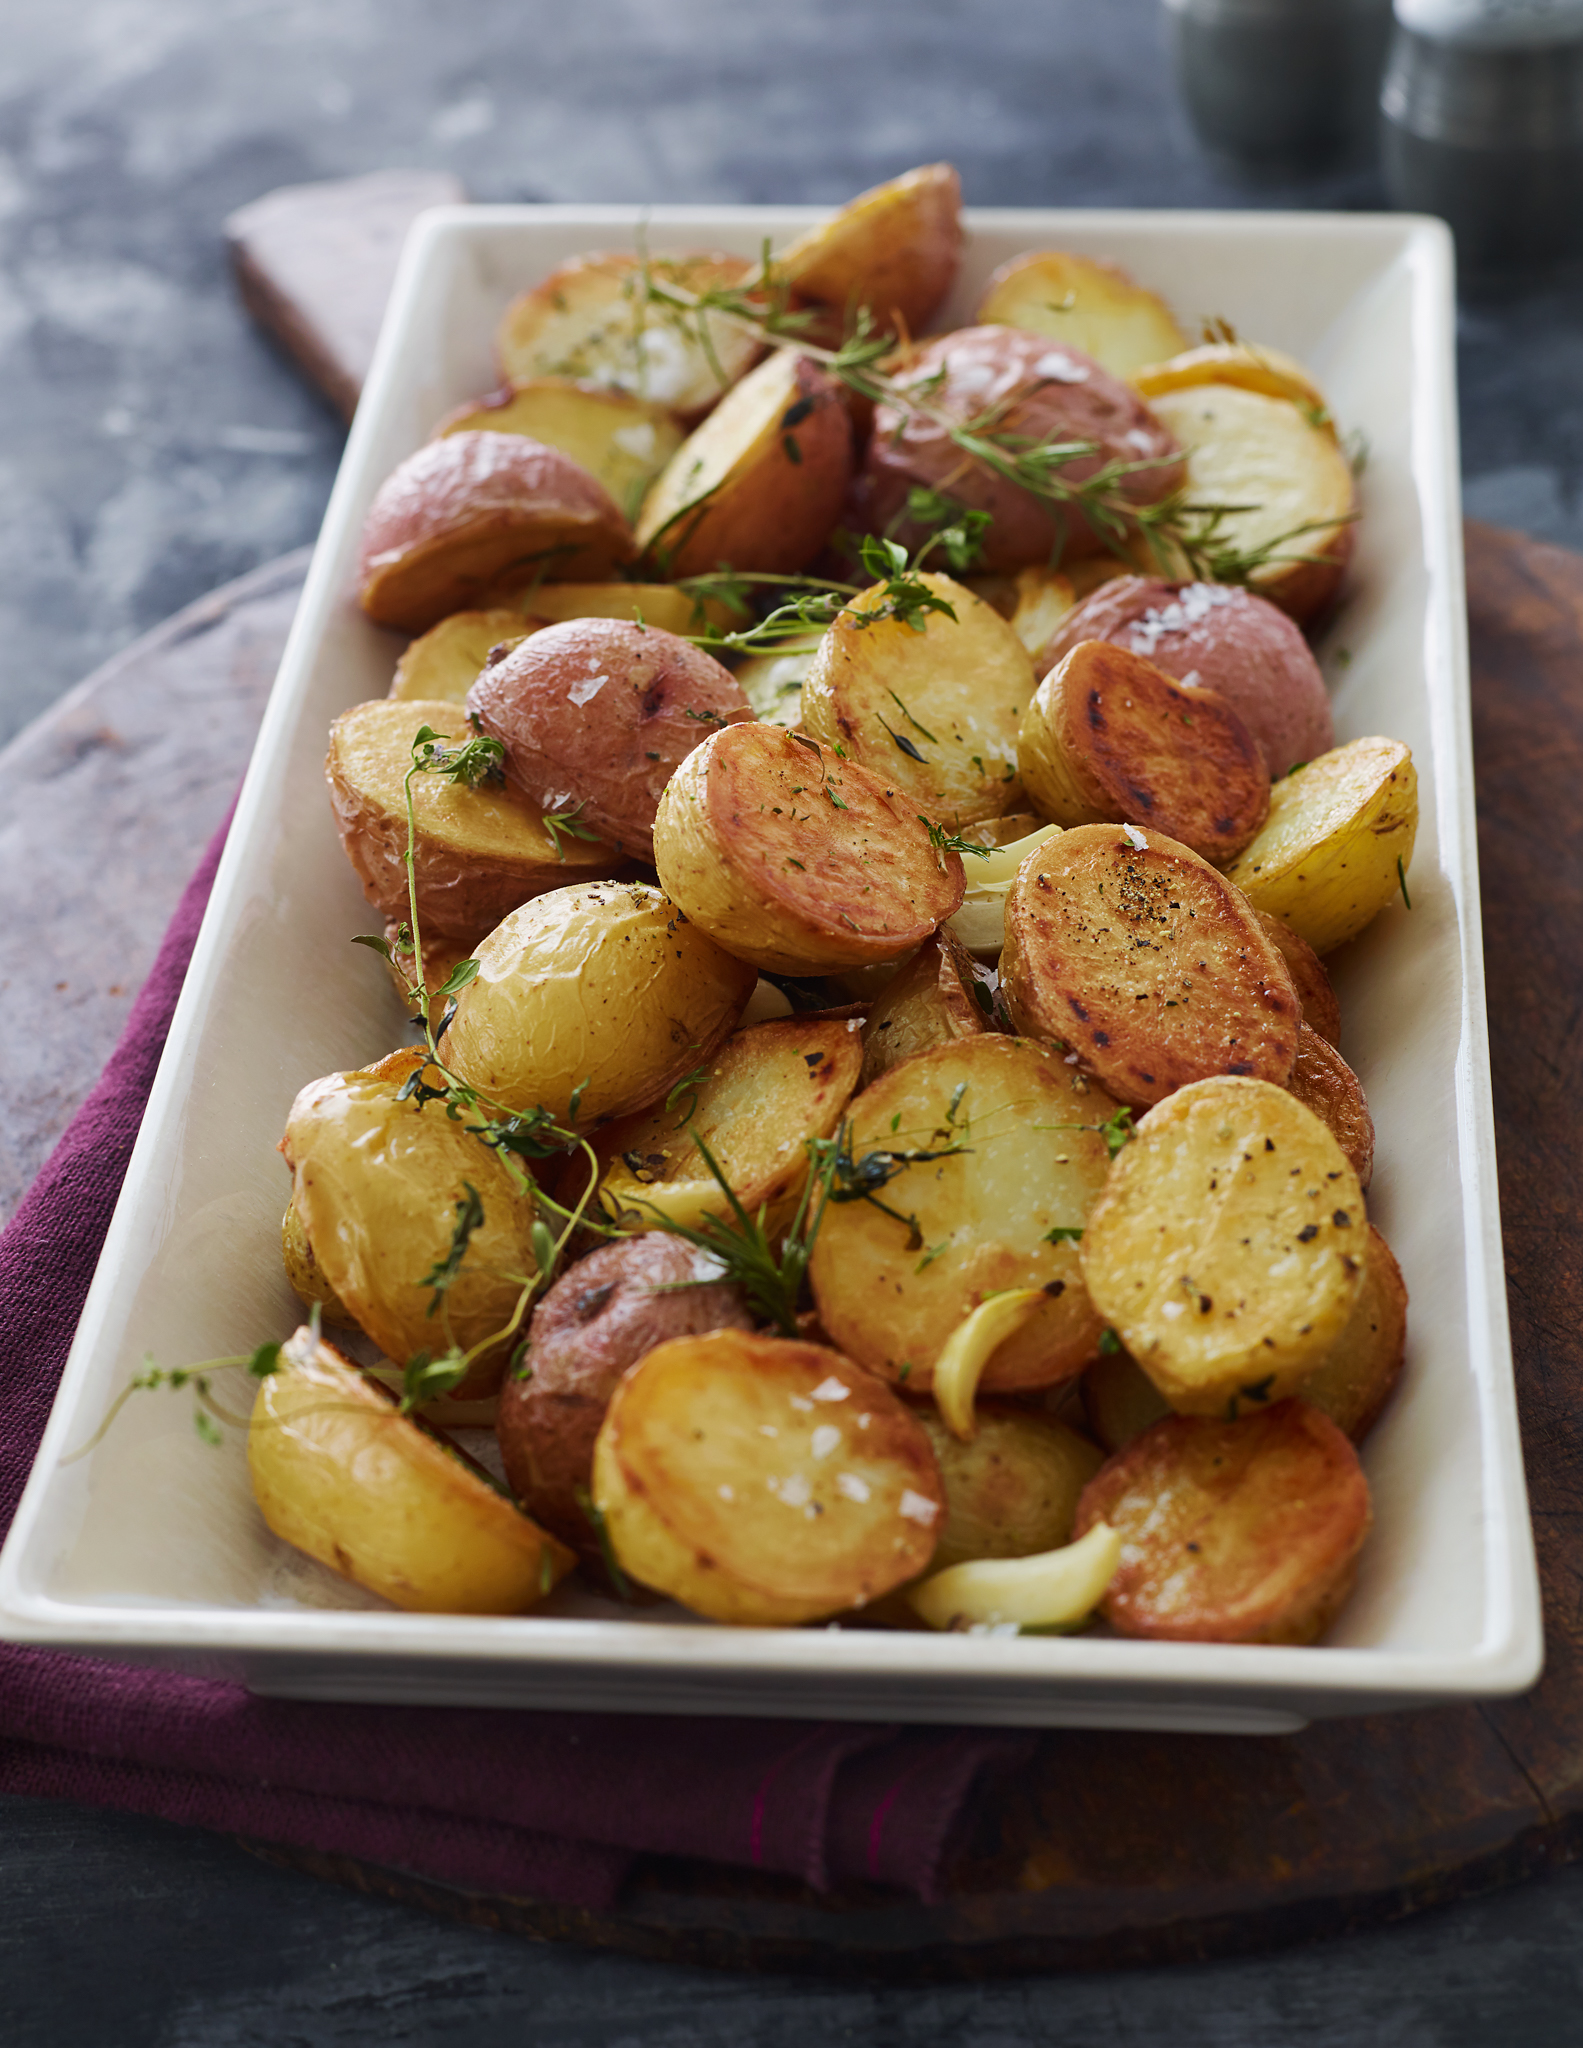 Steamed baby potatoes with thyme